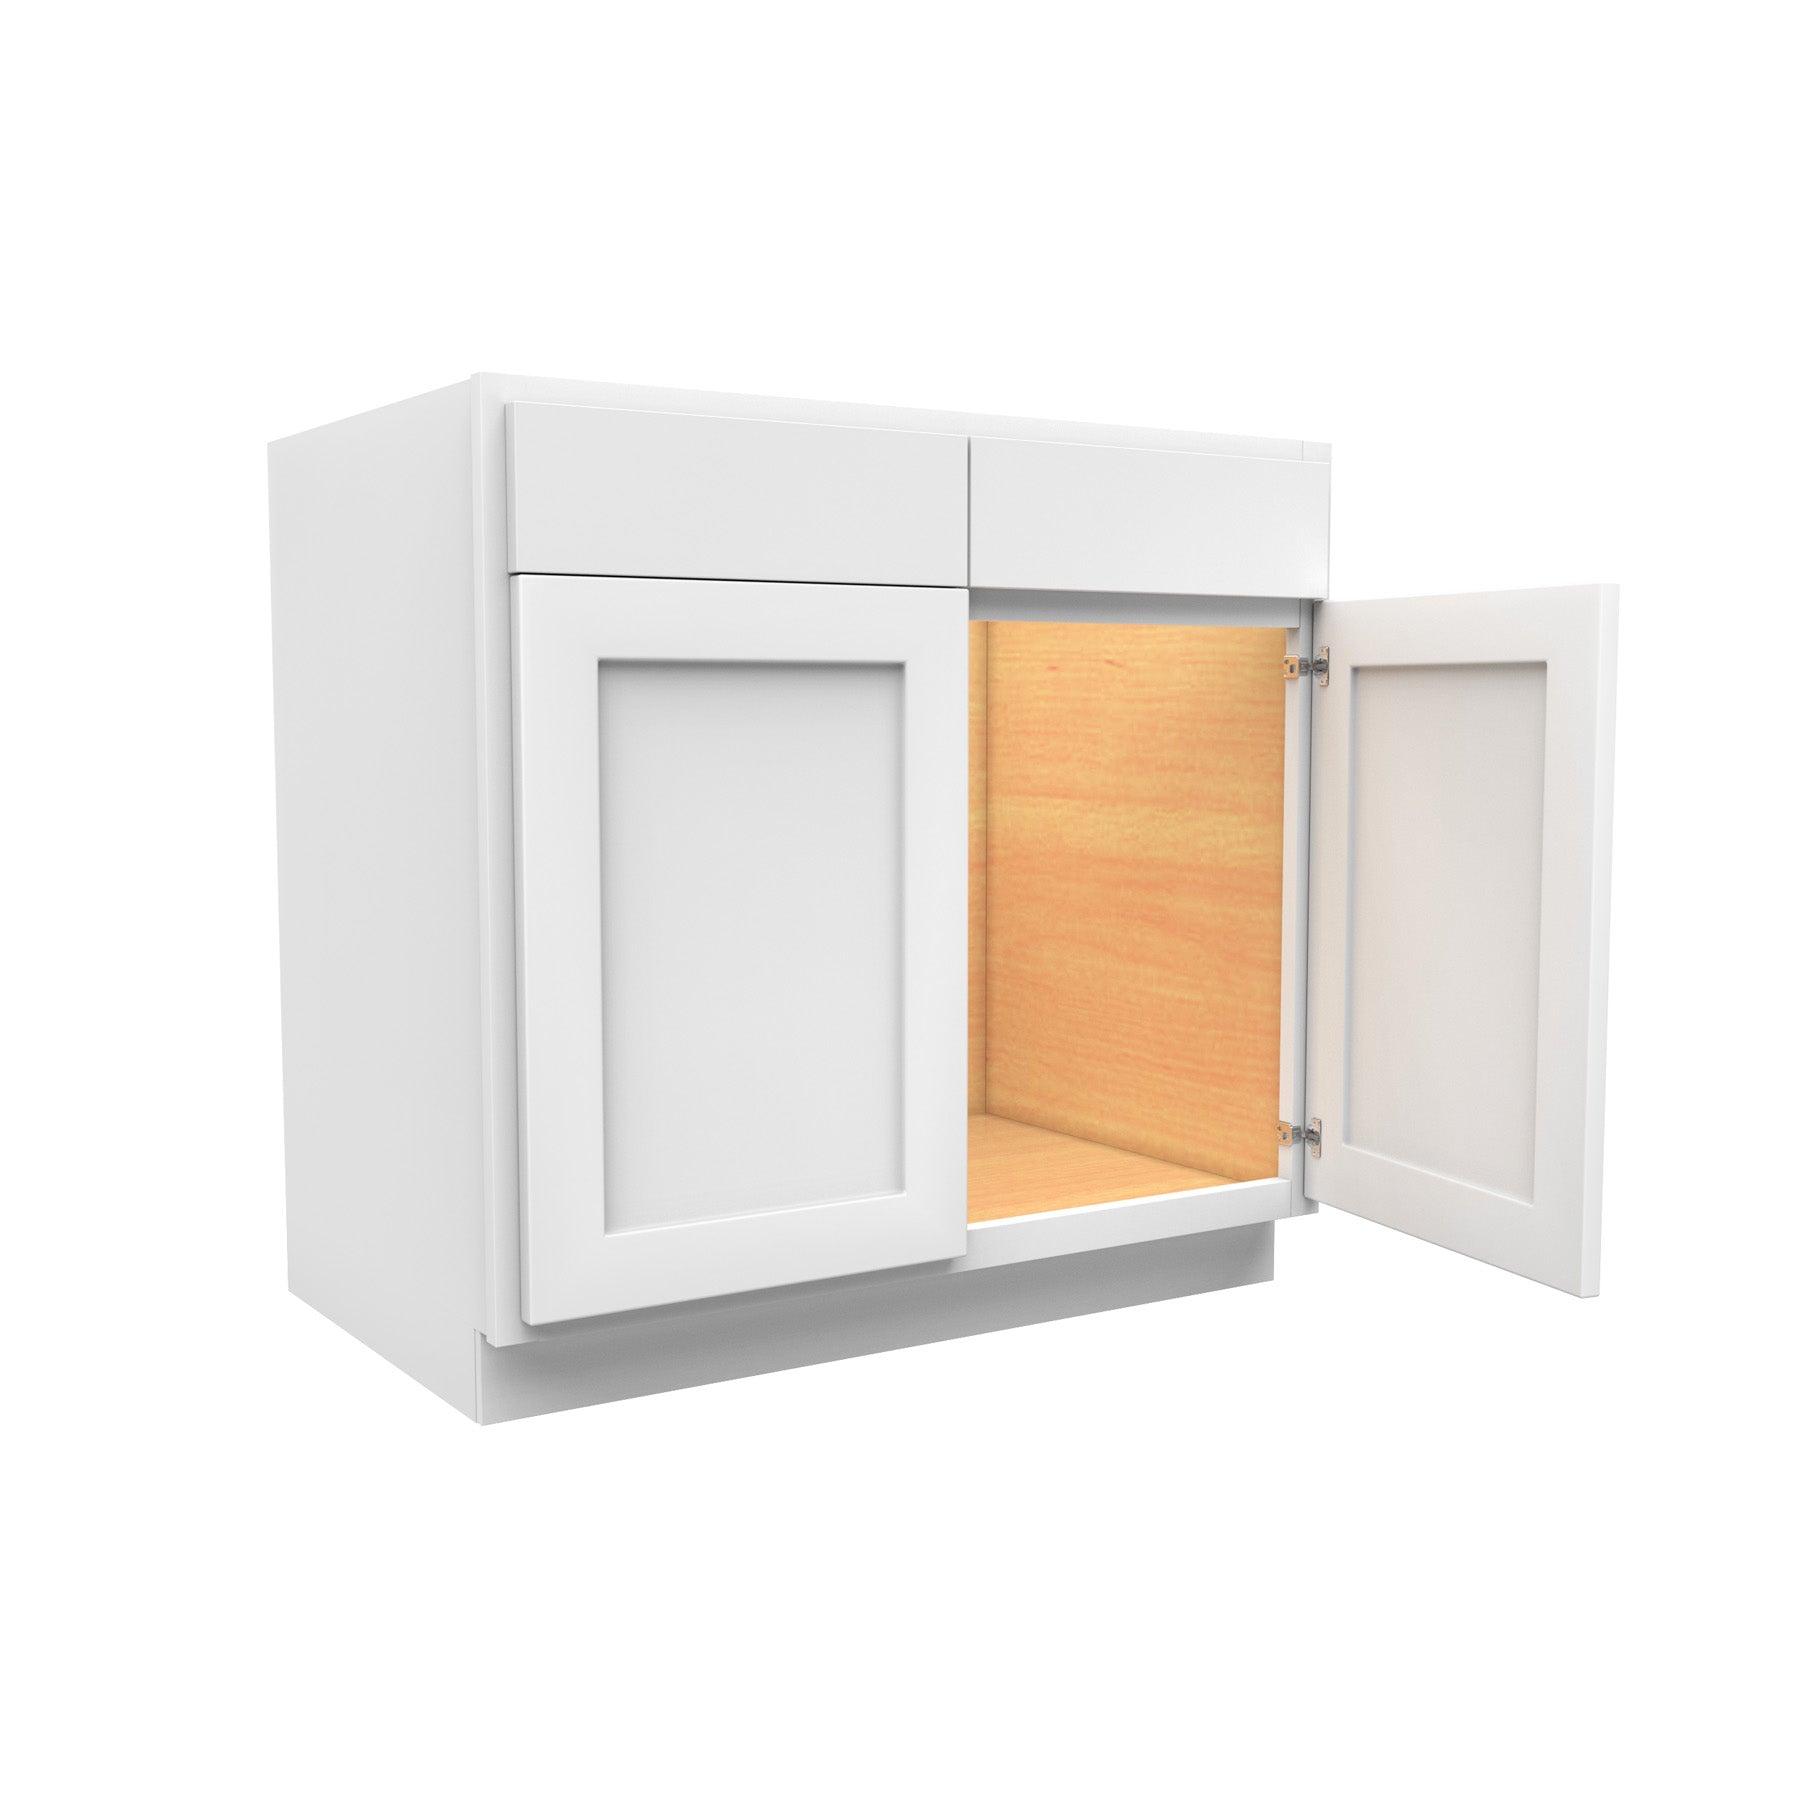 36 Inch Wide 2 Drawer Sink Base Vanity Cabinet - Luxor White Shaker - Ready To Assemble, 36"W x 34.5"H x 21"D